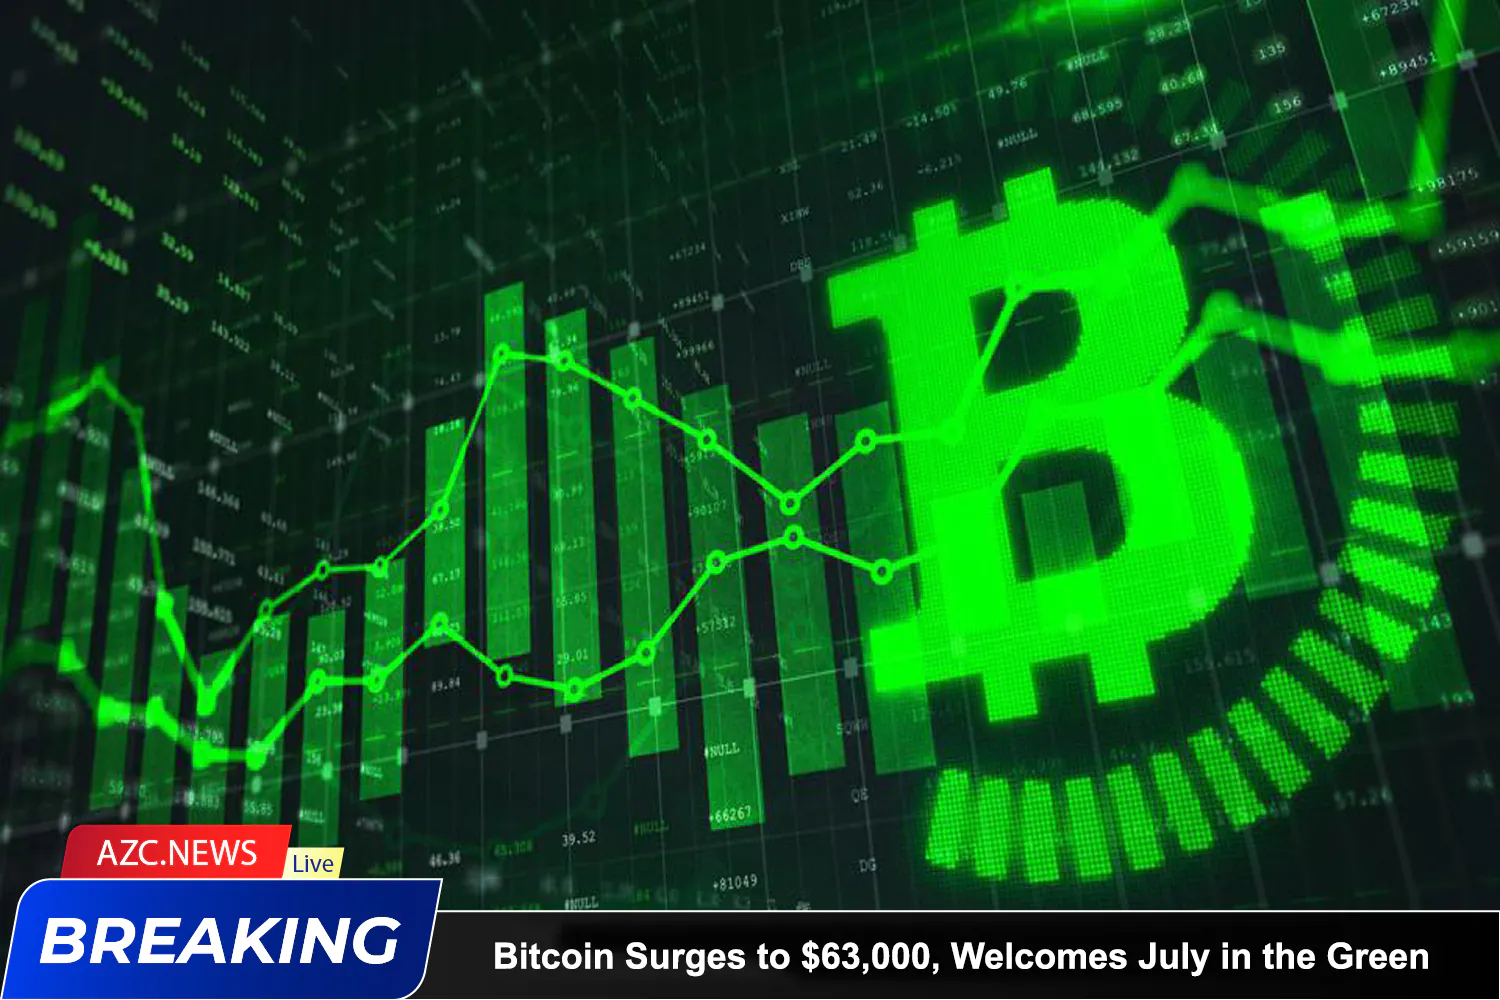 Azcnews Bitcoin Surges To $63,000, Welcomes July In The Green